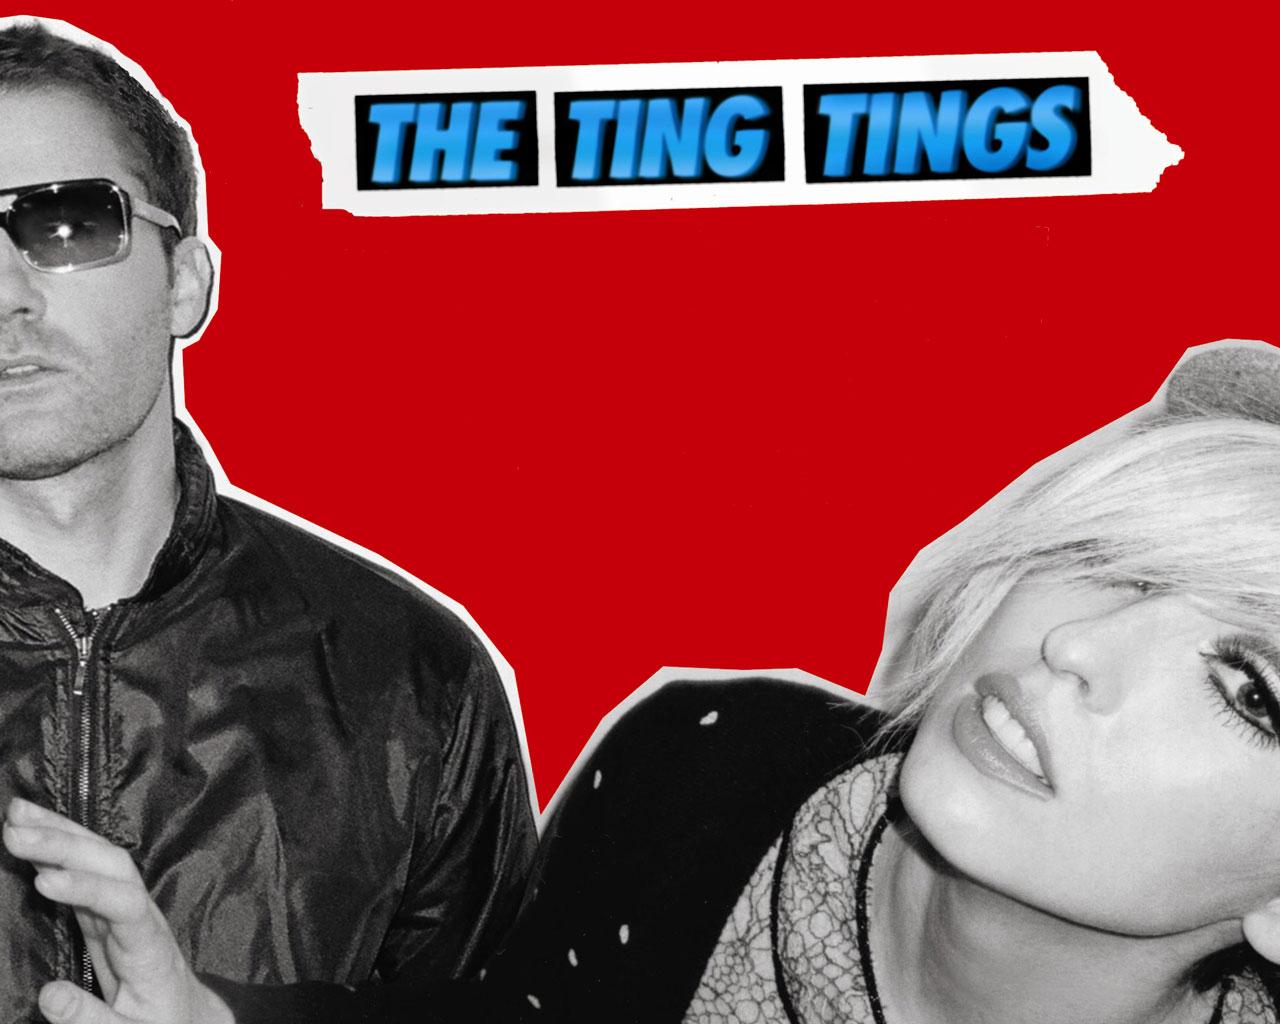 The Ting Tings Wallpaper #4 1280 x 1024 